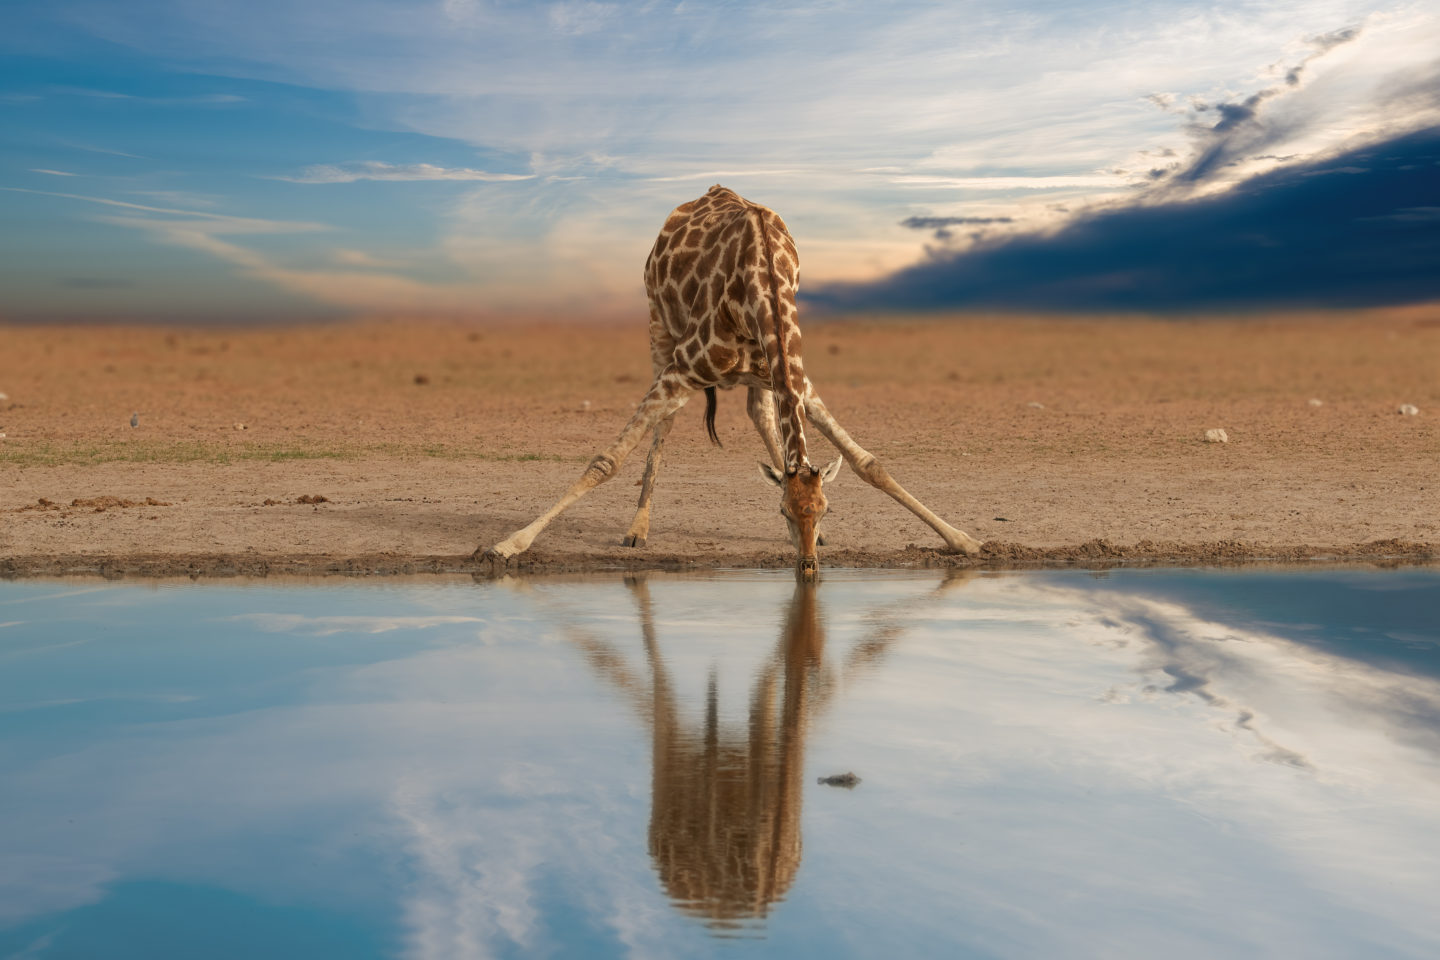 Giraffes drinking water at a waterhole in the Etosha National Park in Namibia